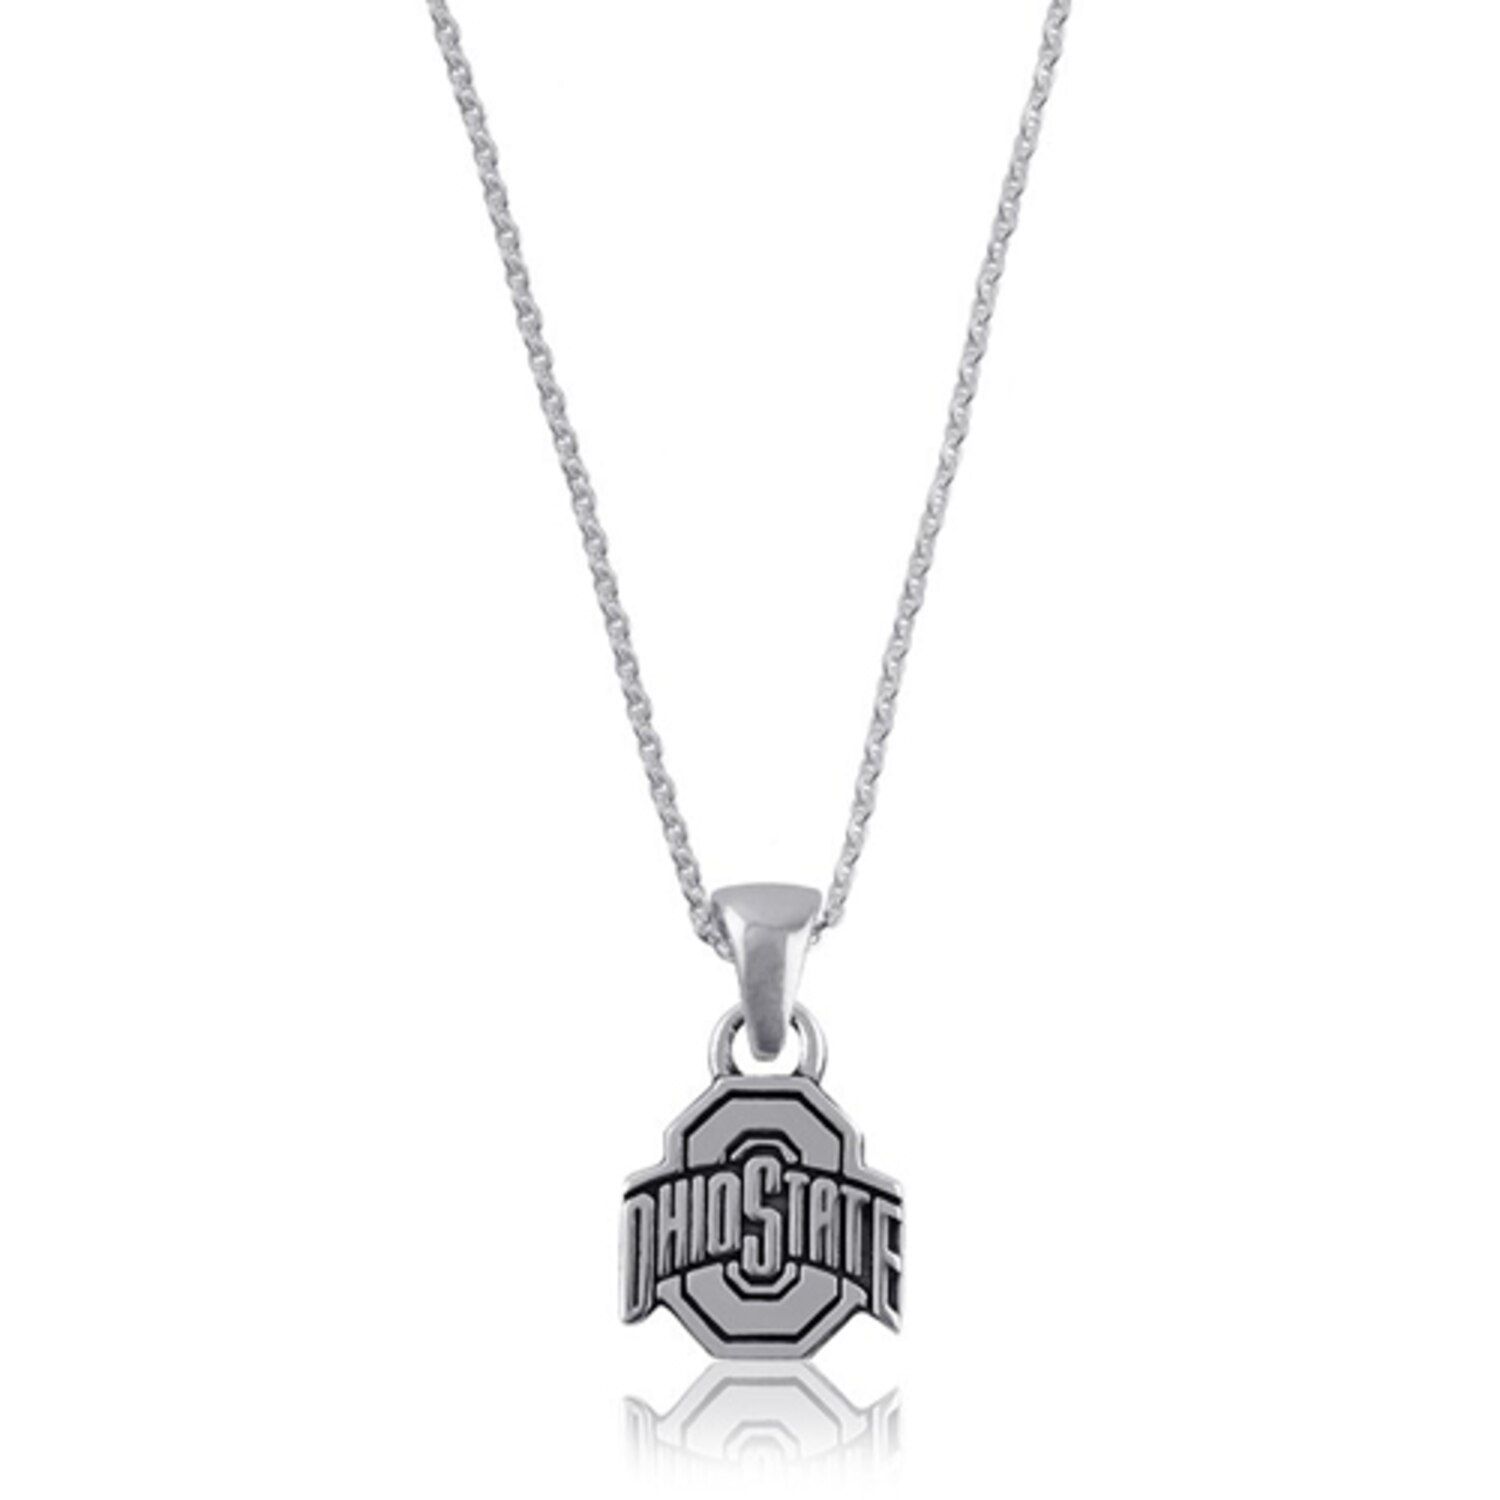 Image for Unbranded Women's Dayna Designs Ohio State Buckeyes Pendant Necklace at Kohl's.